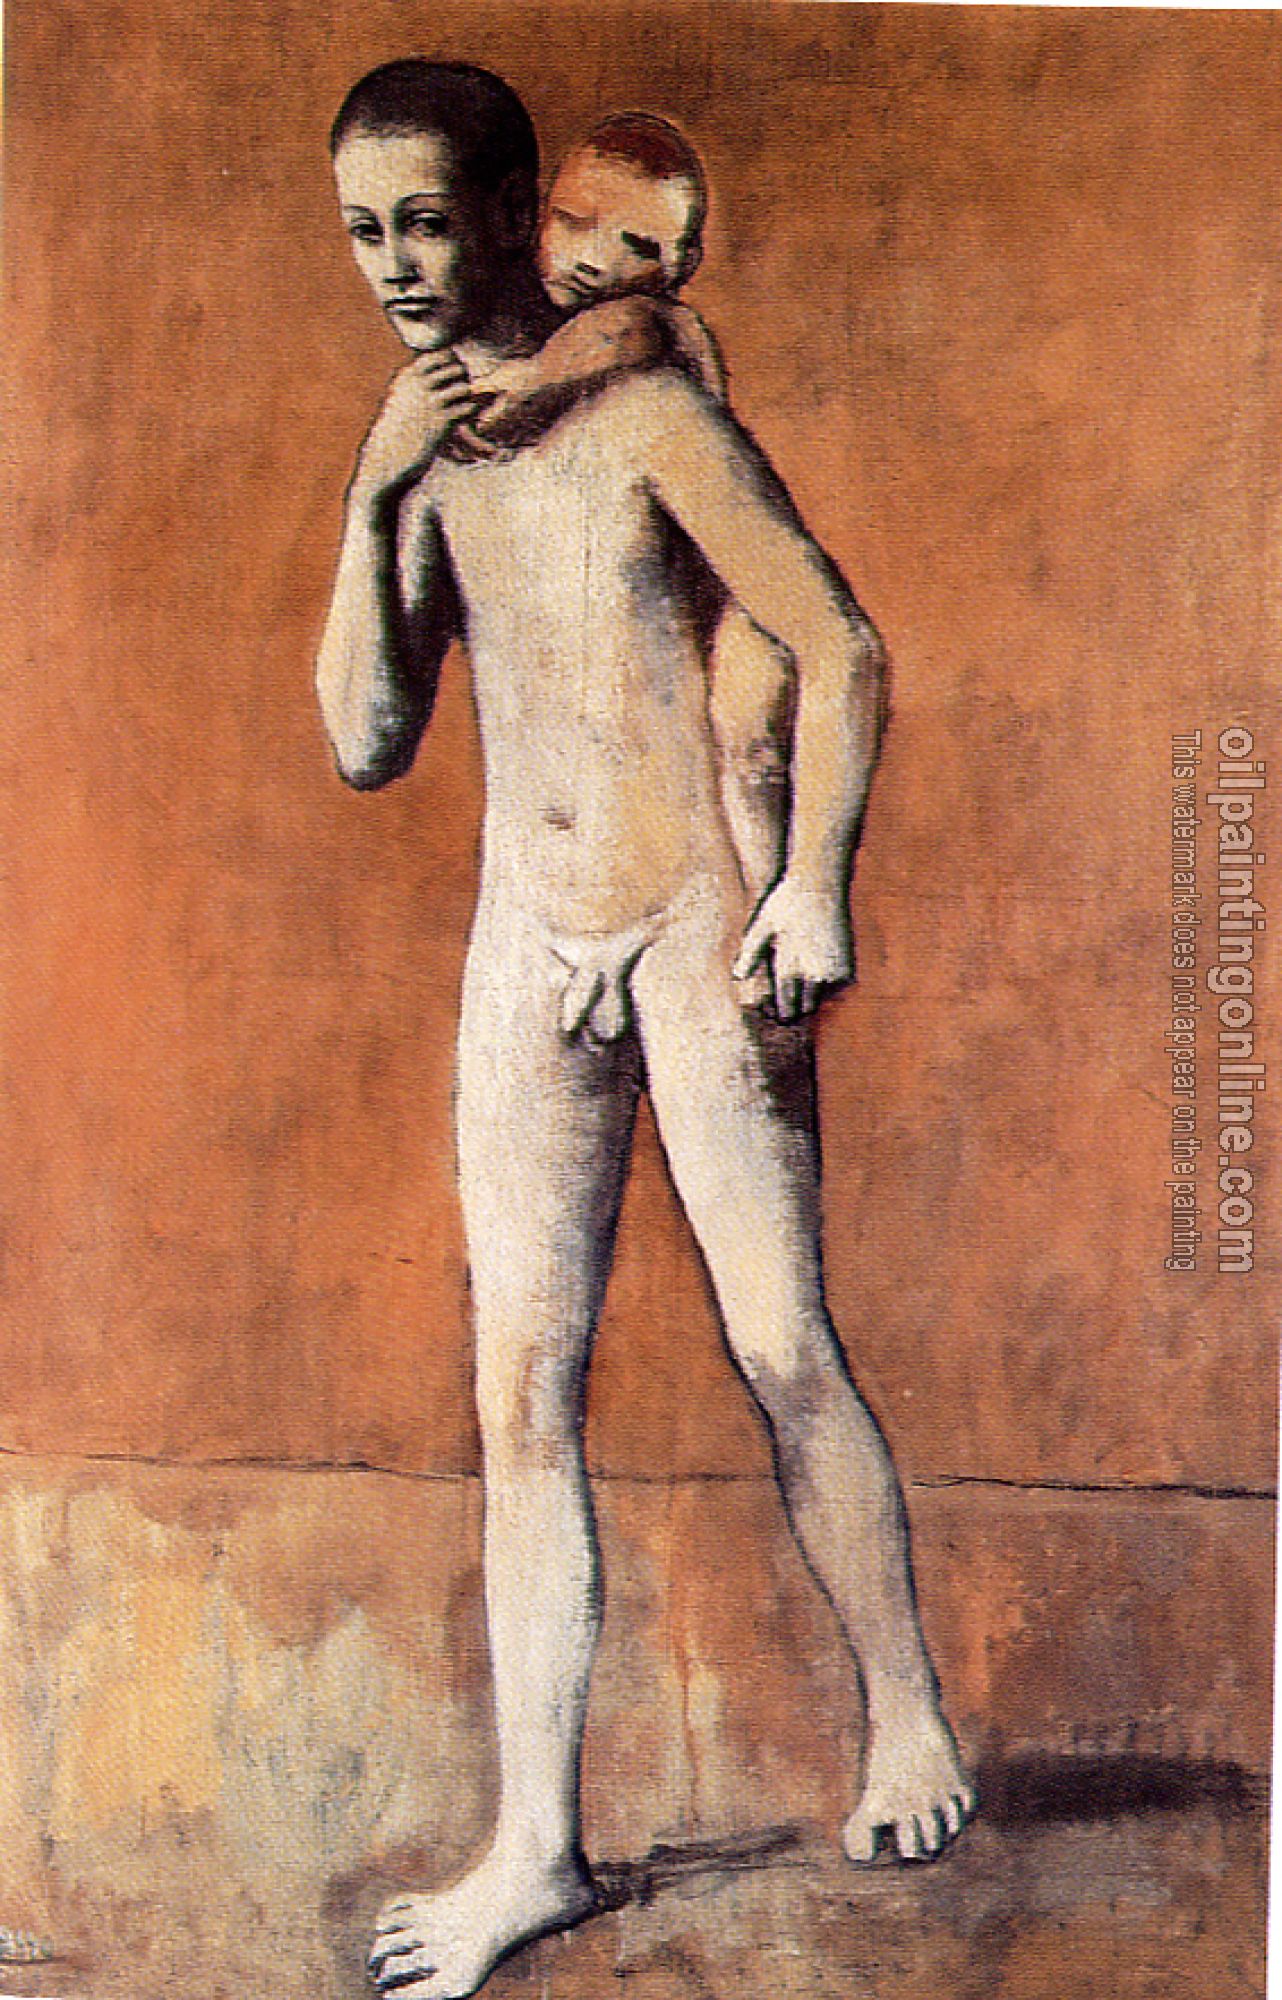 Picasso, Pablo - the two brothers